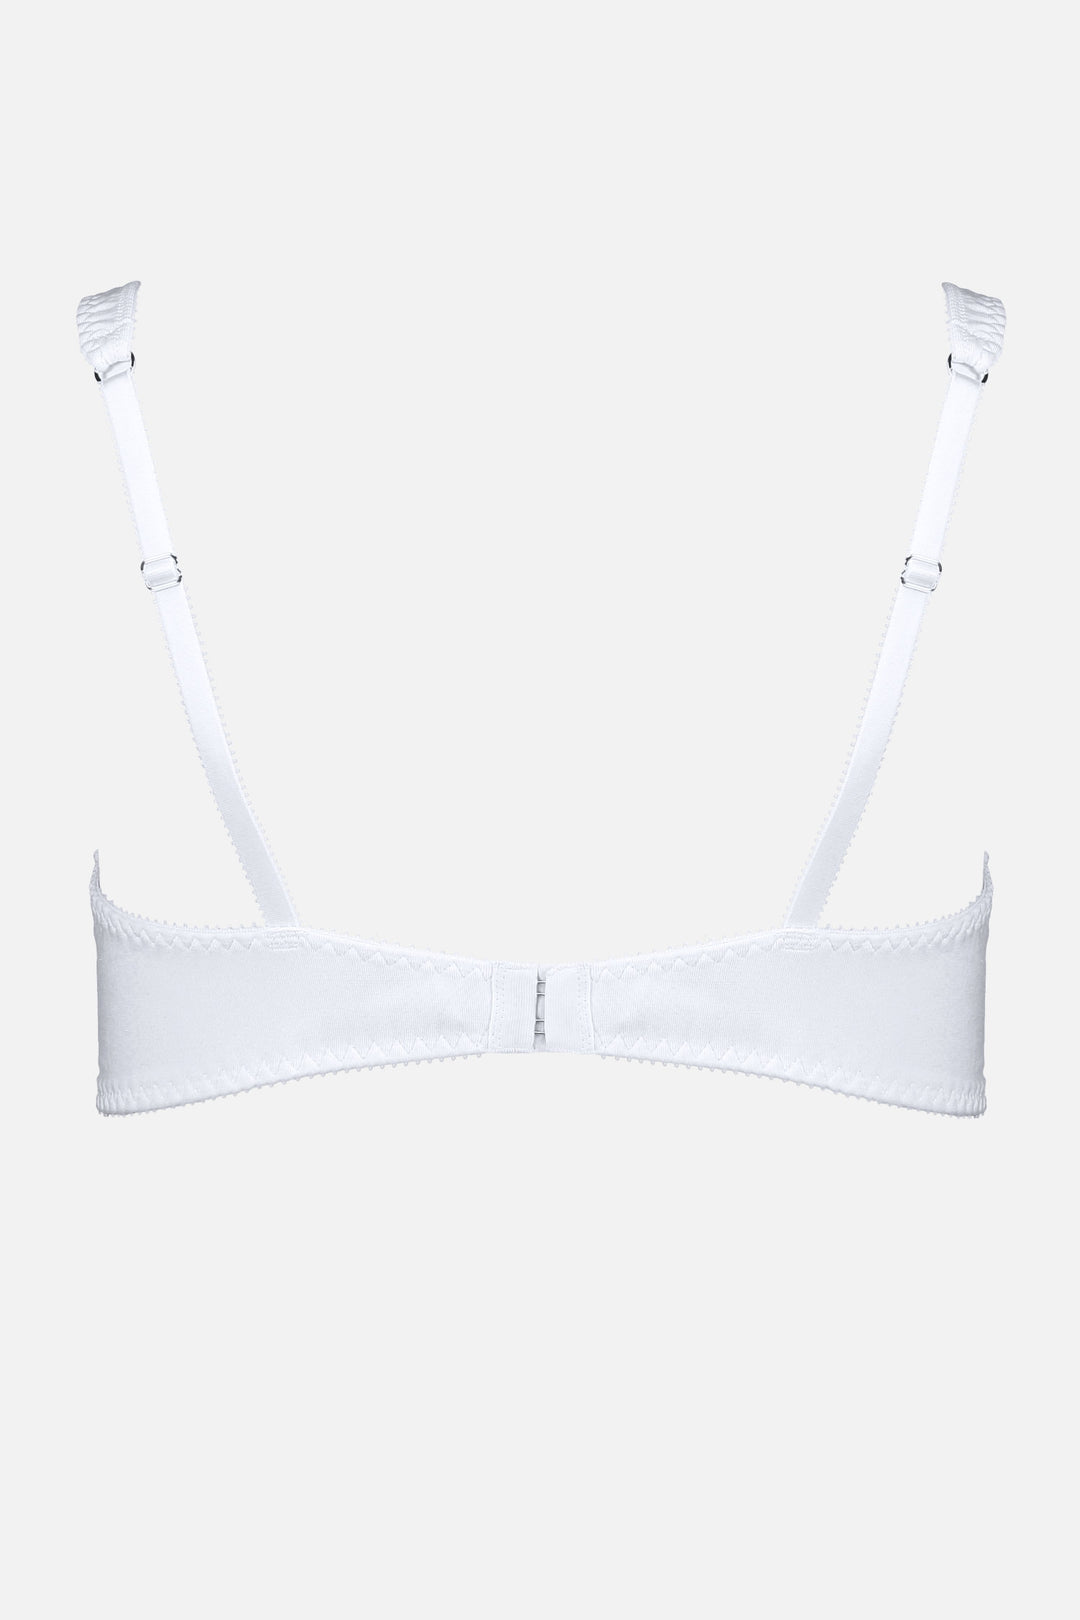 Videris Lingerie Sarah wire free soft cup bra in white embroidered TENCEL™ features adjustable back straps and hook and eyes